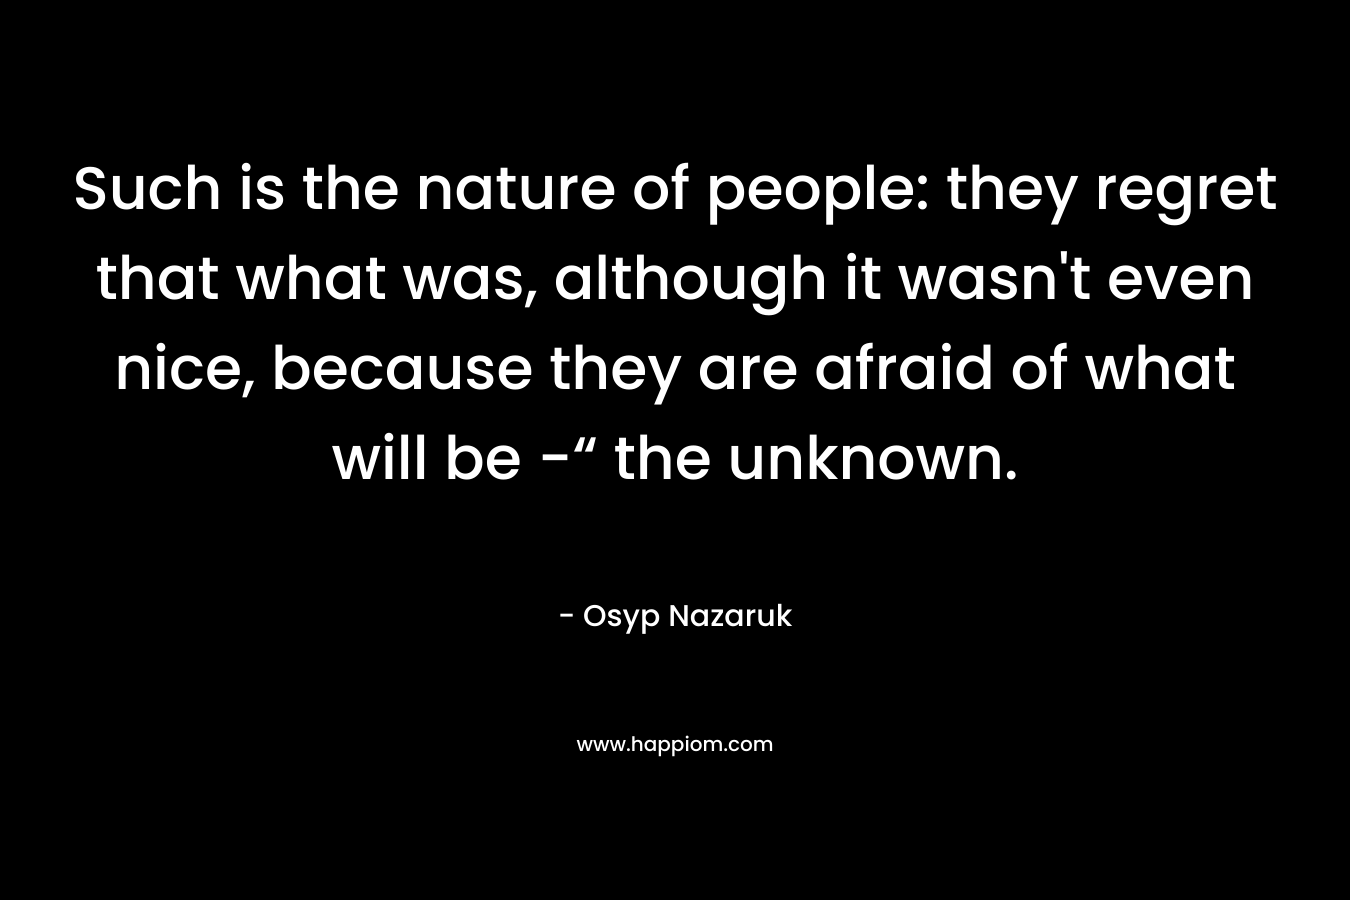 Such is the nature of people: they regret that what was, although it wasn’t even nice, because they are afraid of what will be -“ the unknown. – Osyp Nazaruk